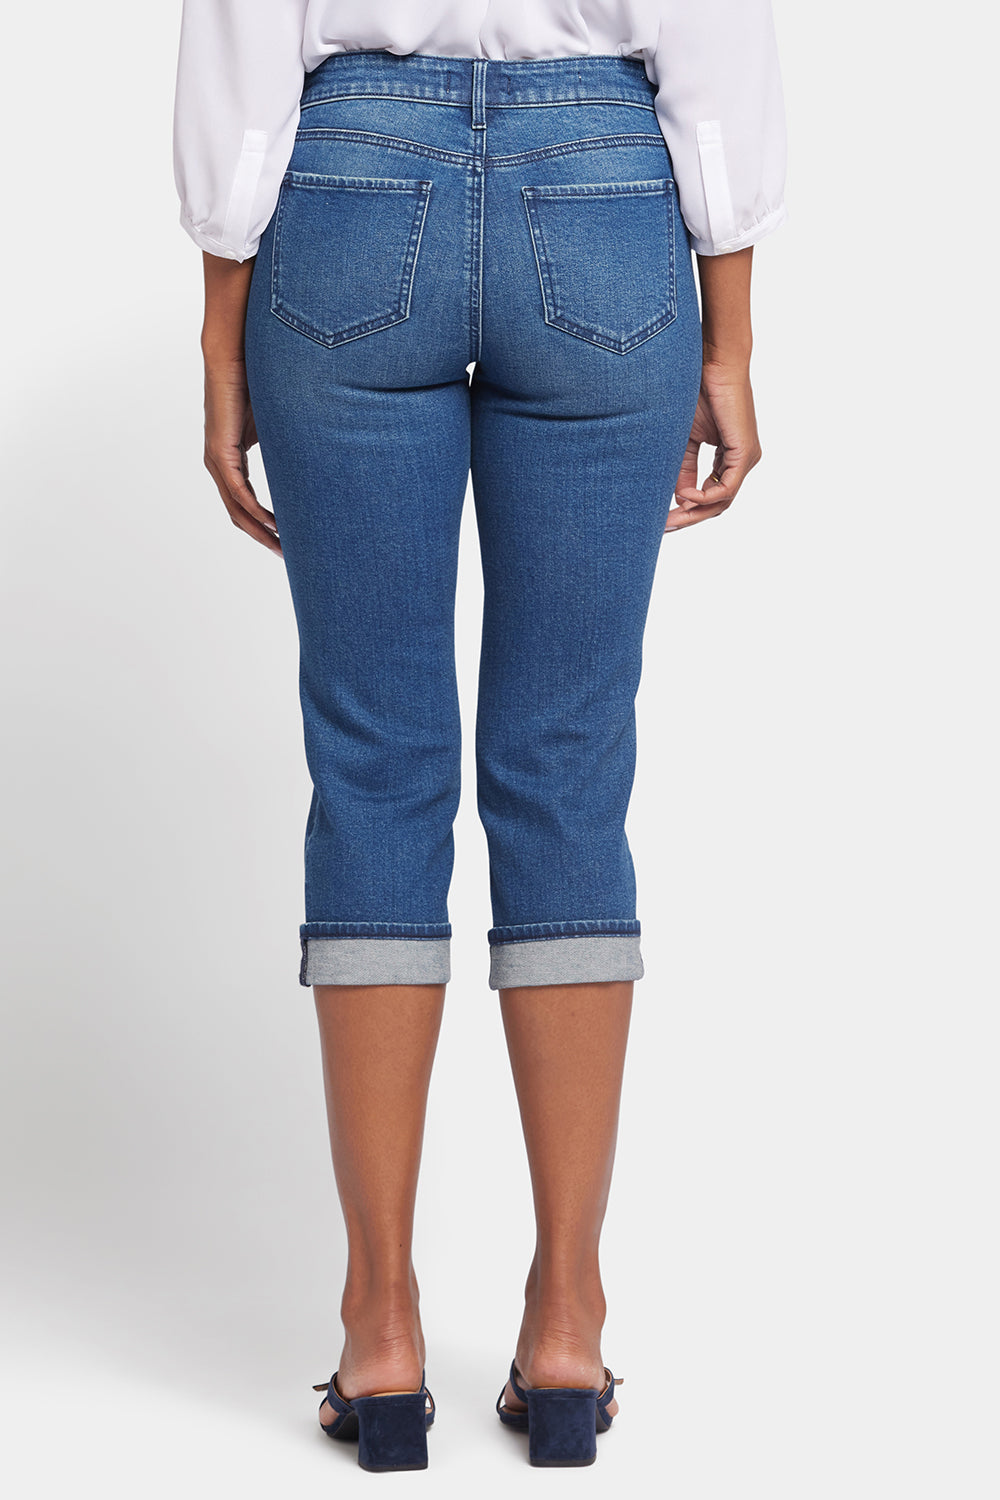 Marilyn Straight Crop Jeans - Windfall